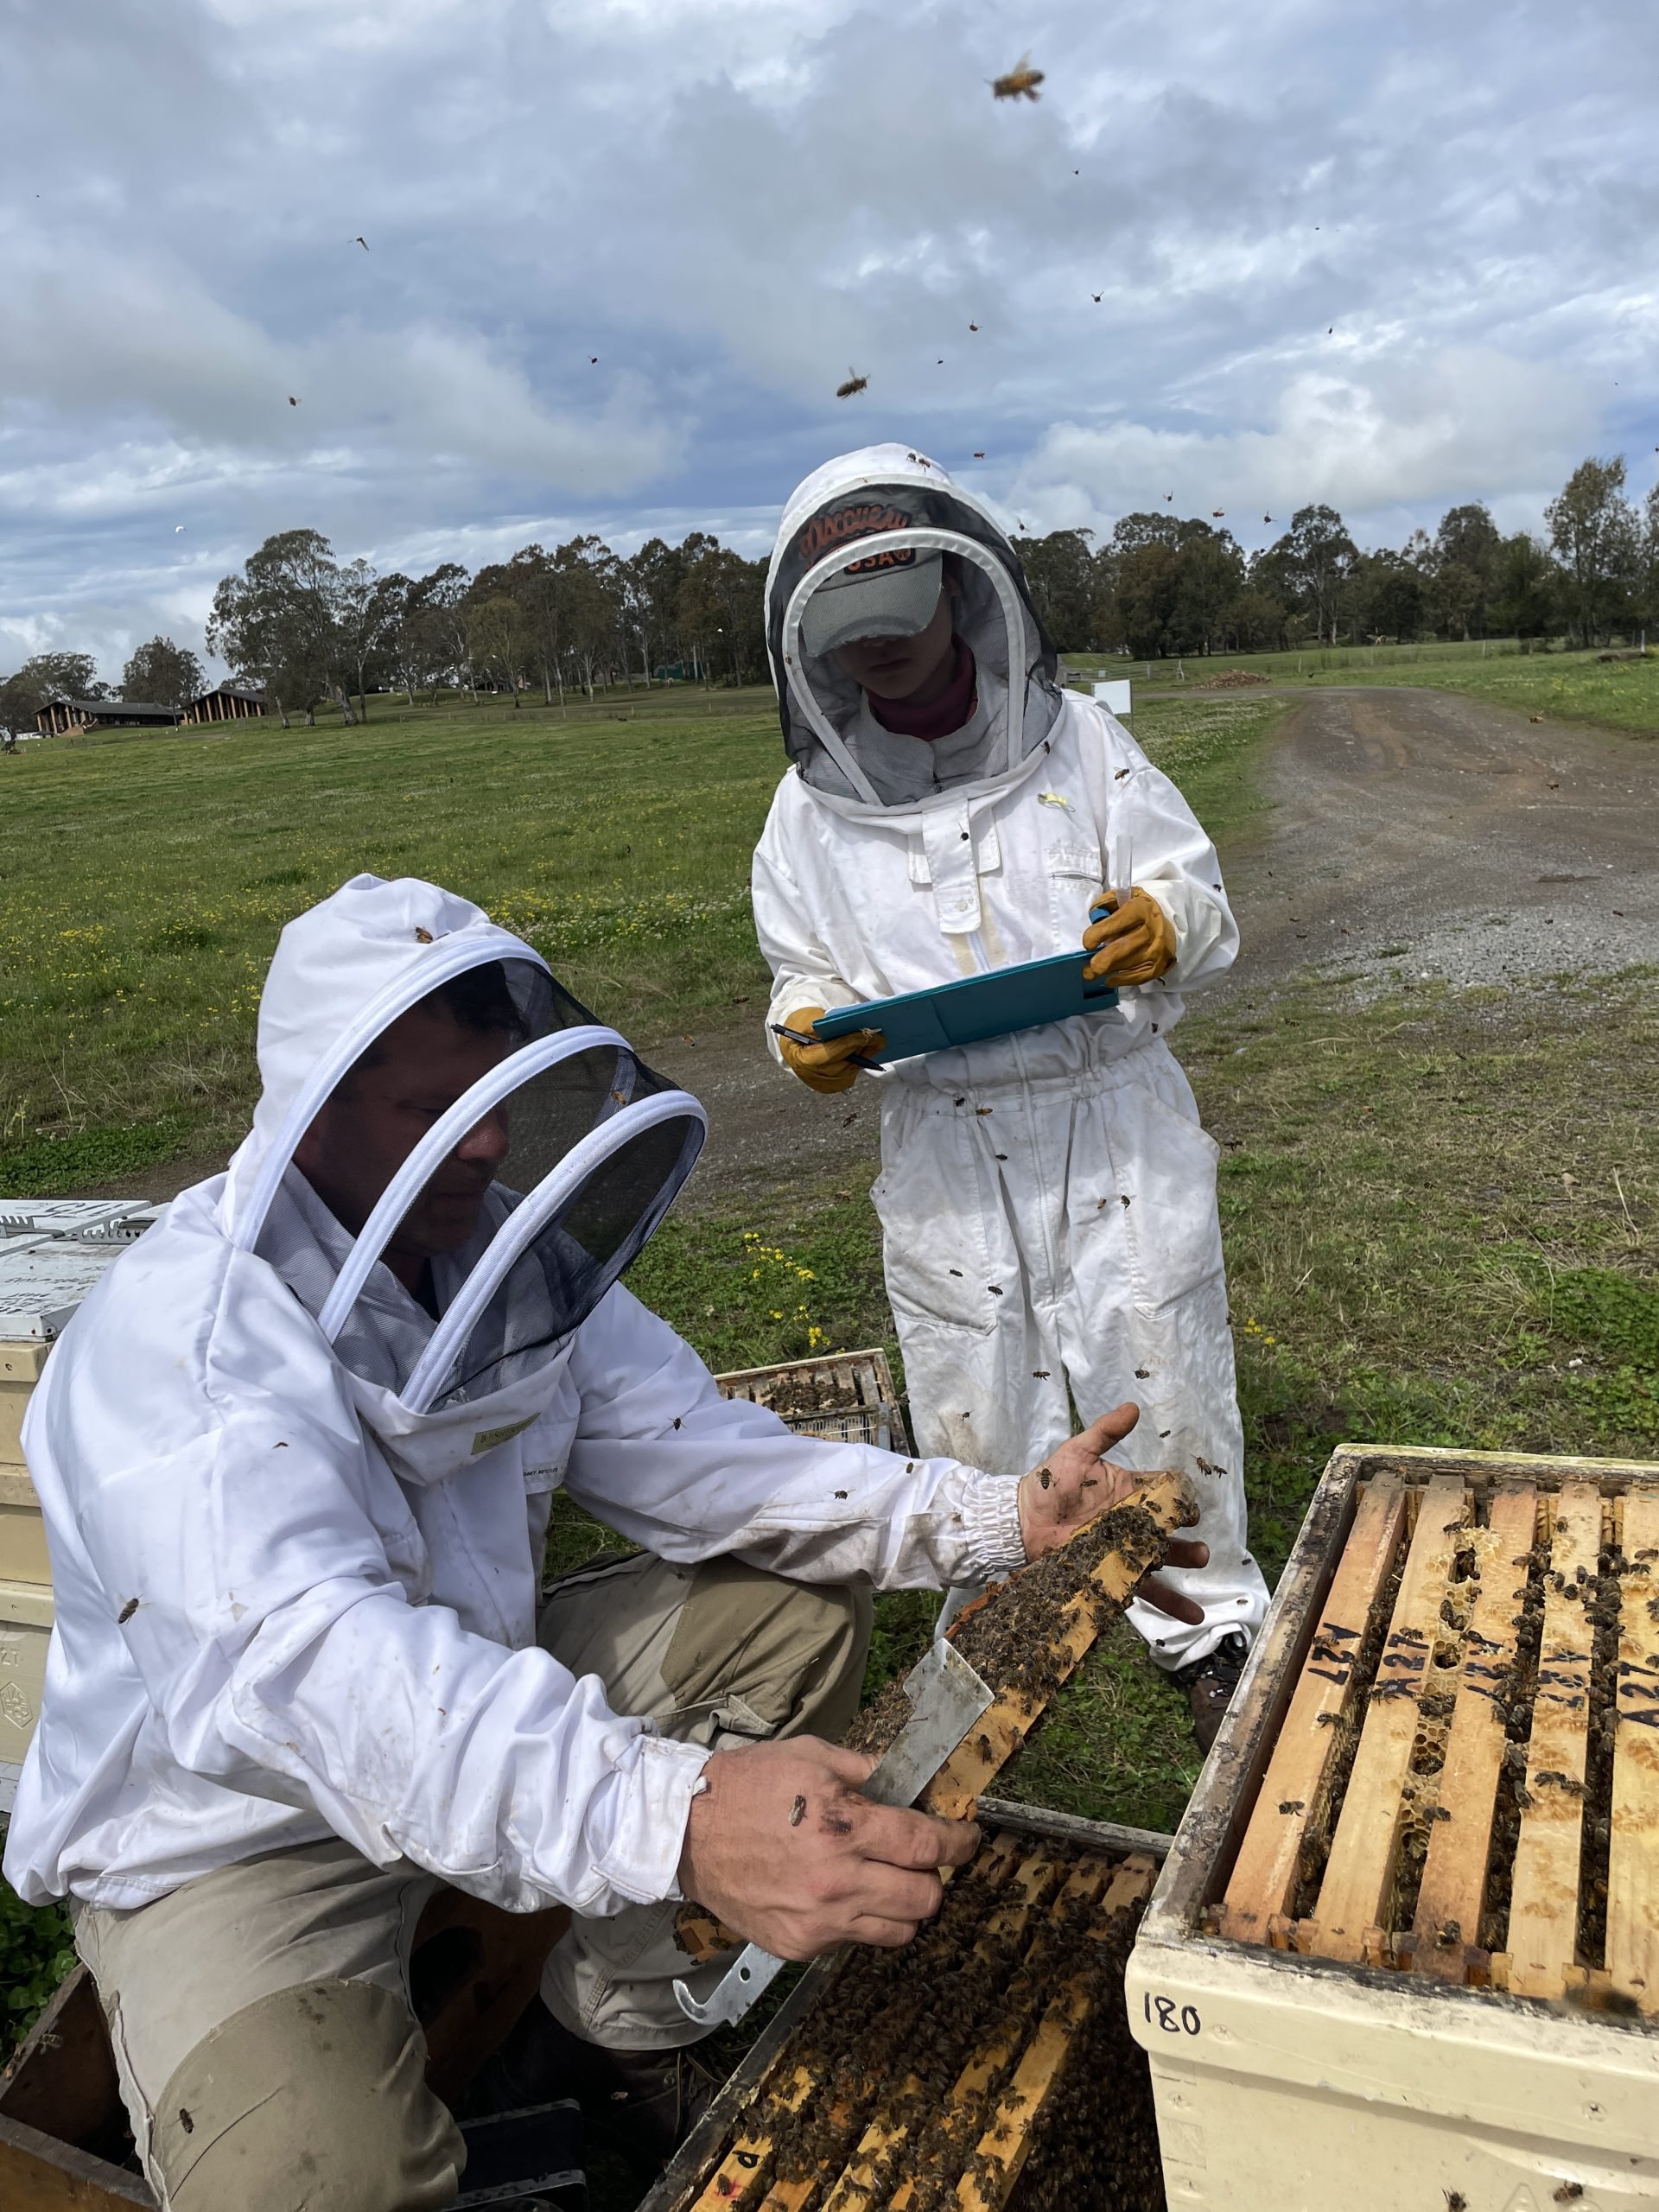 Plan Bee staff Slavi Nenov and Erica Mo inspecting the hives at Tocal in happier times